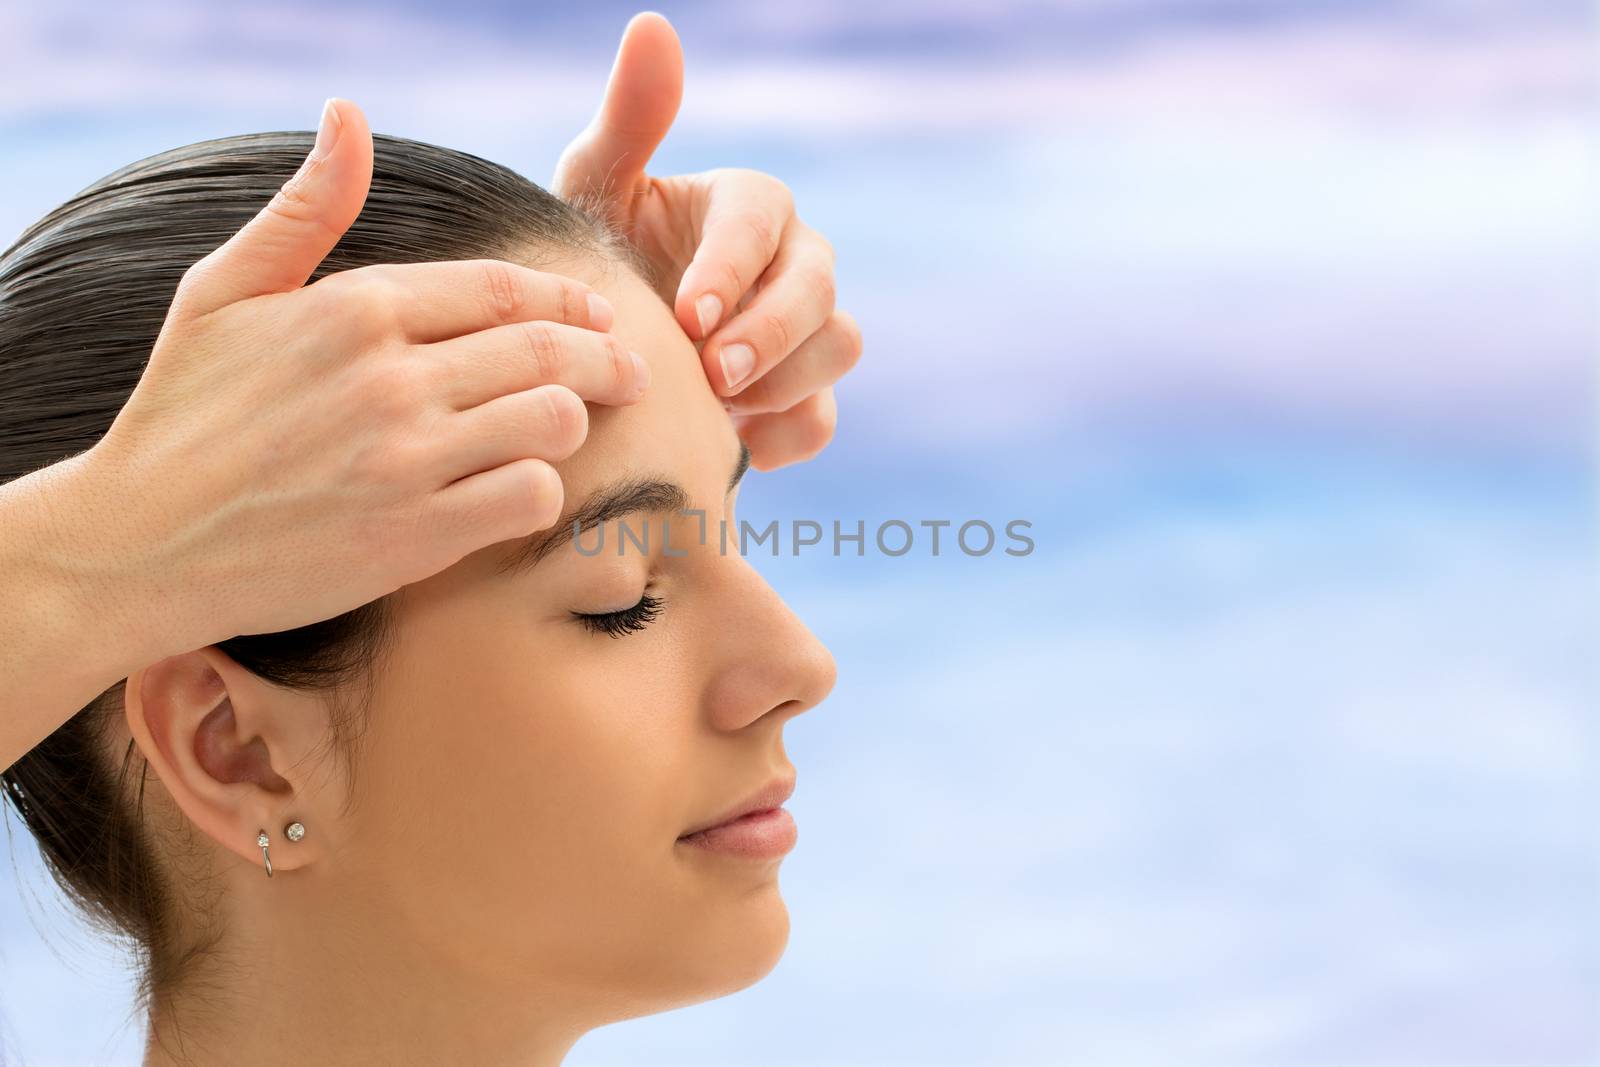 Therapist doing alternative healing on young woman. Reiki therapist touching energetic area on forehead.